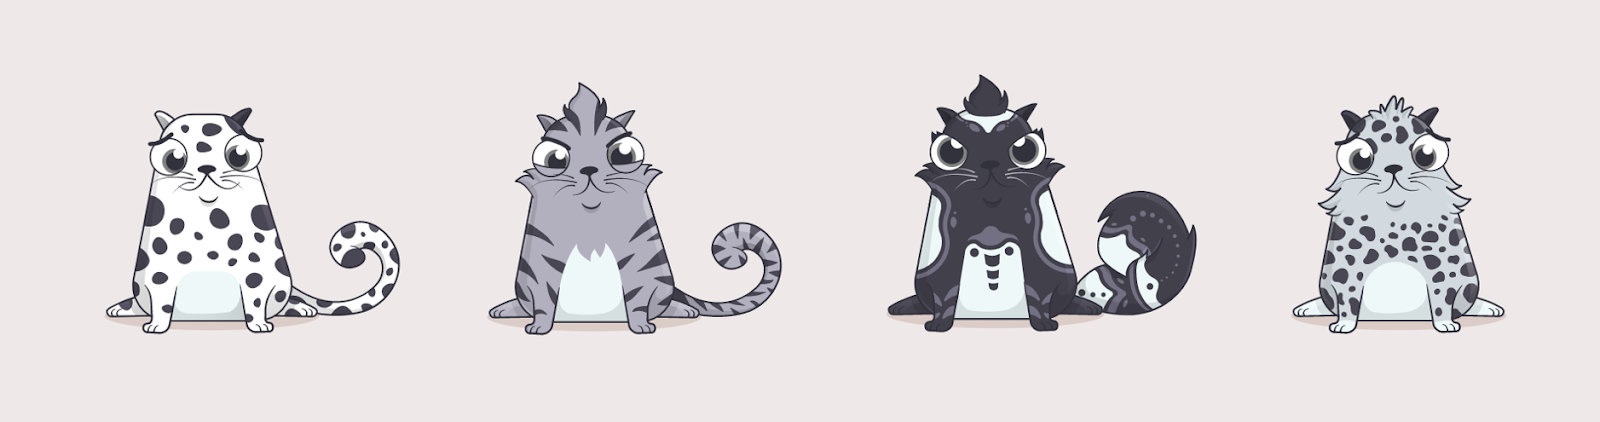 (But don’t worry, you can still get monochromatic “Vintage Kitties” anytime.)